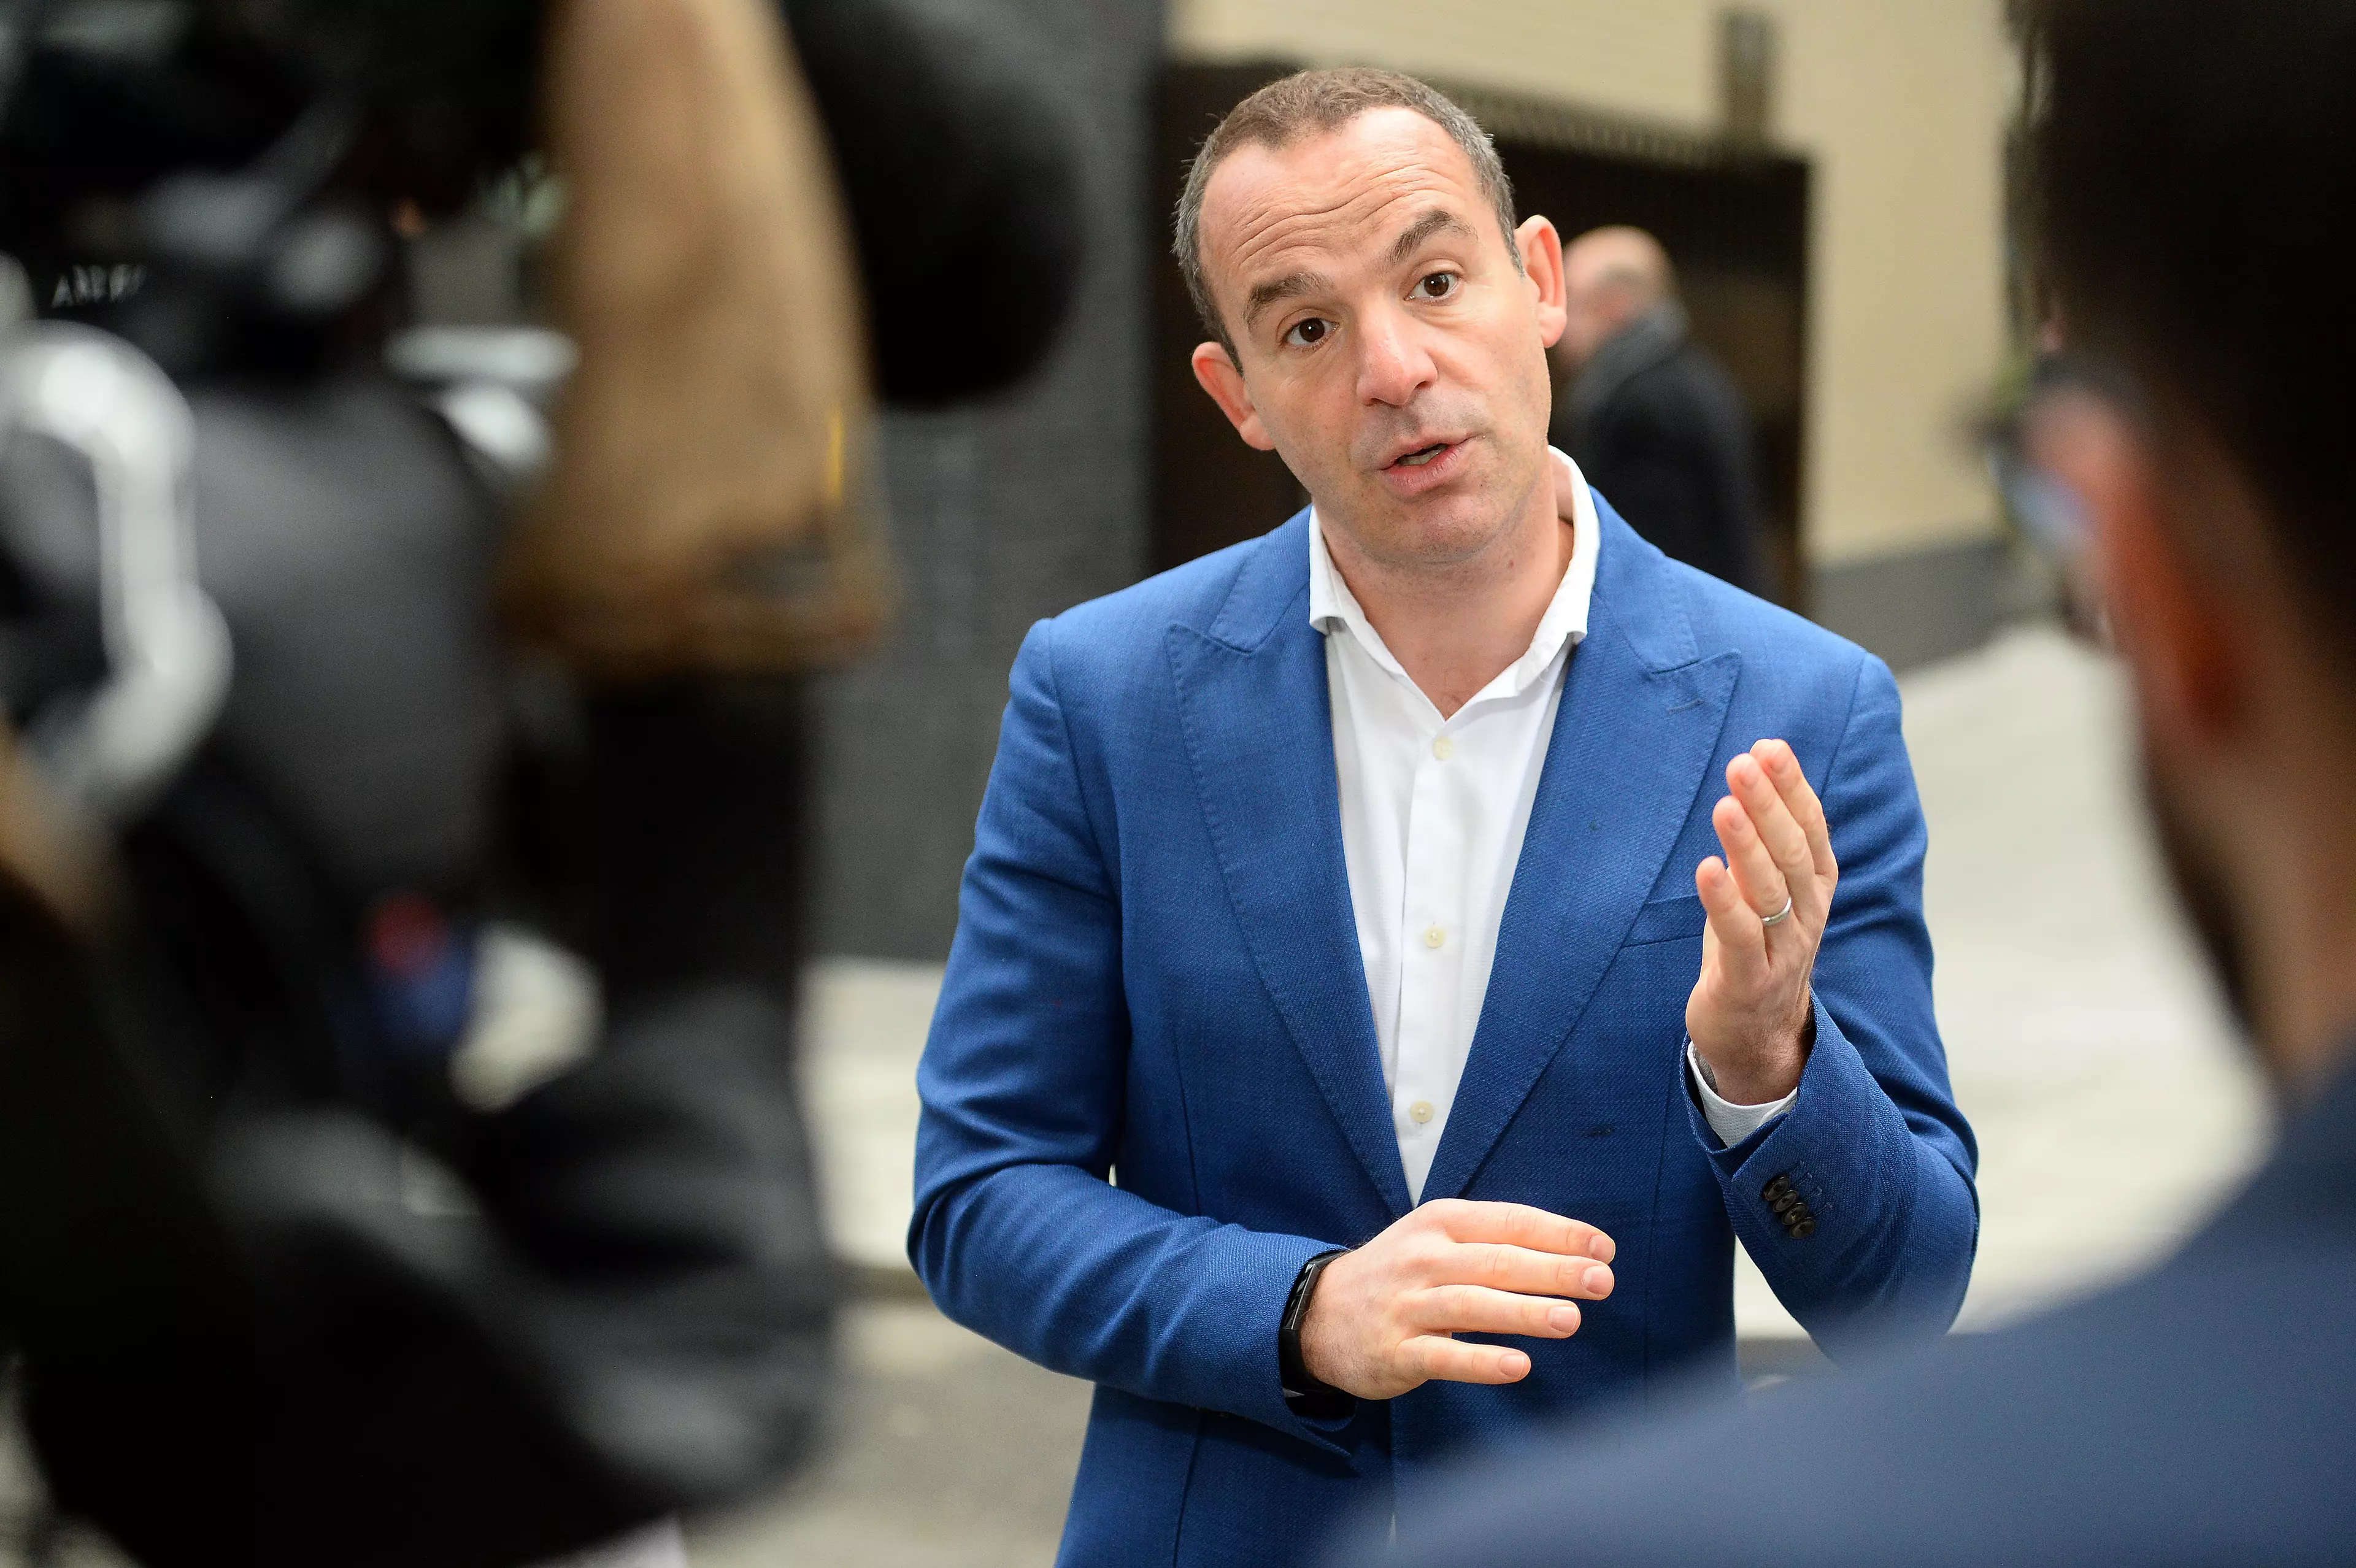 Martin Lewis has advised you can still claim work from home tax relief (